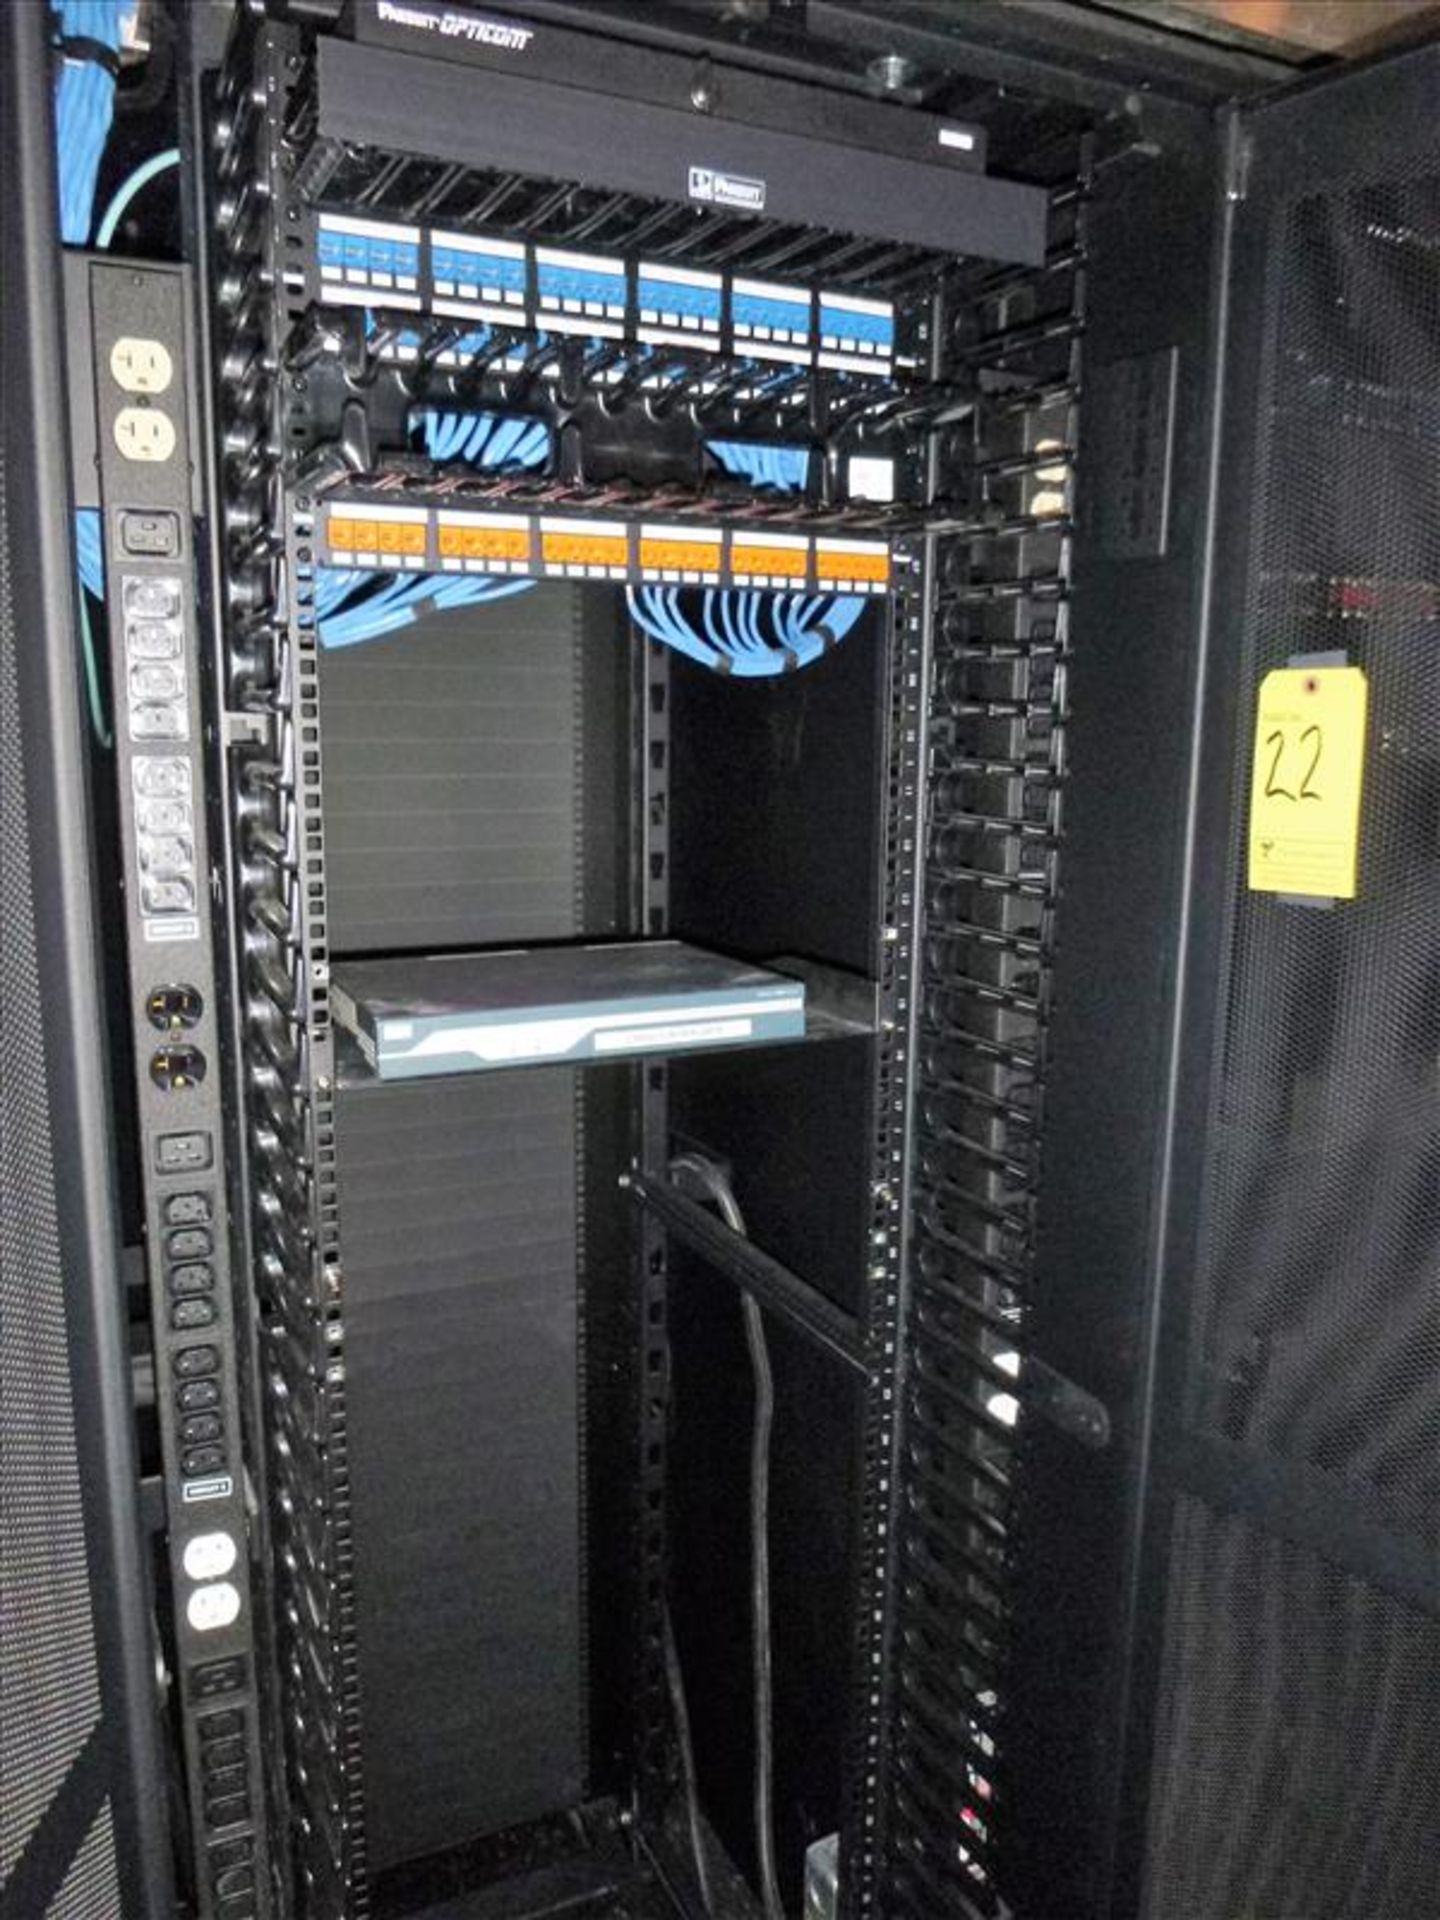 Panduit server cabinet (all cable excluded) (R3C6) incl.: - Cisco 1800 Series router [1]